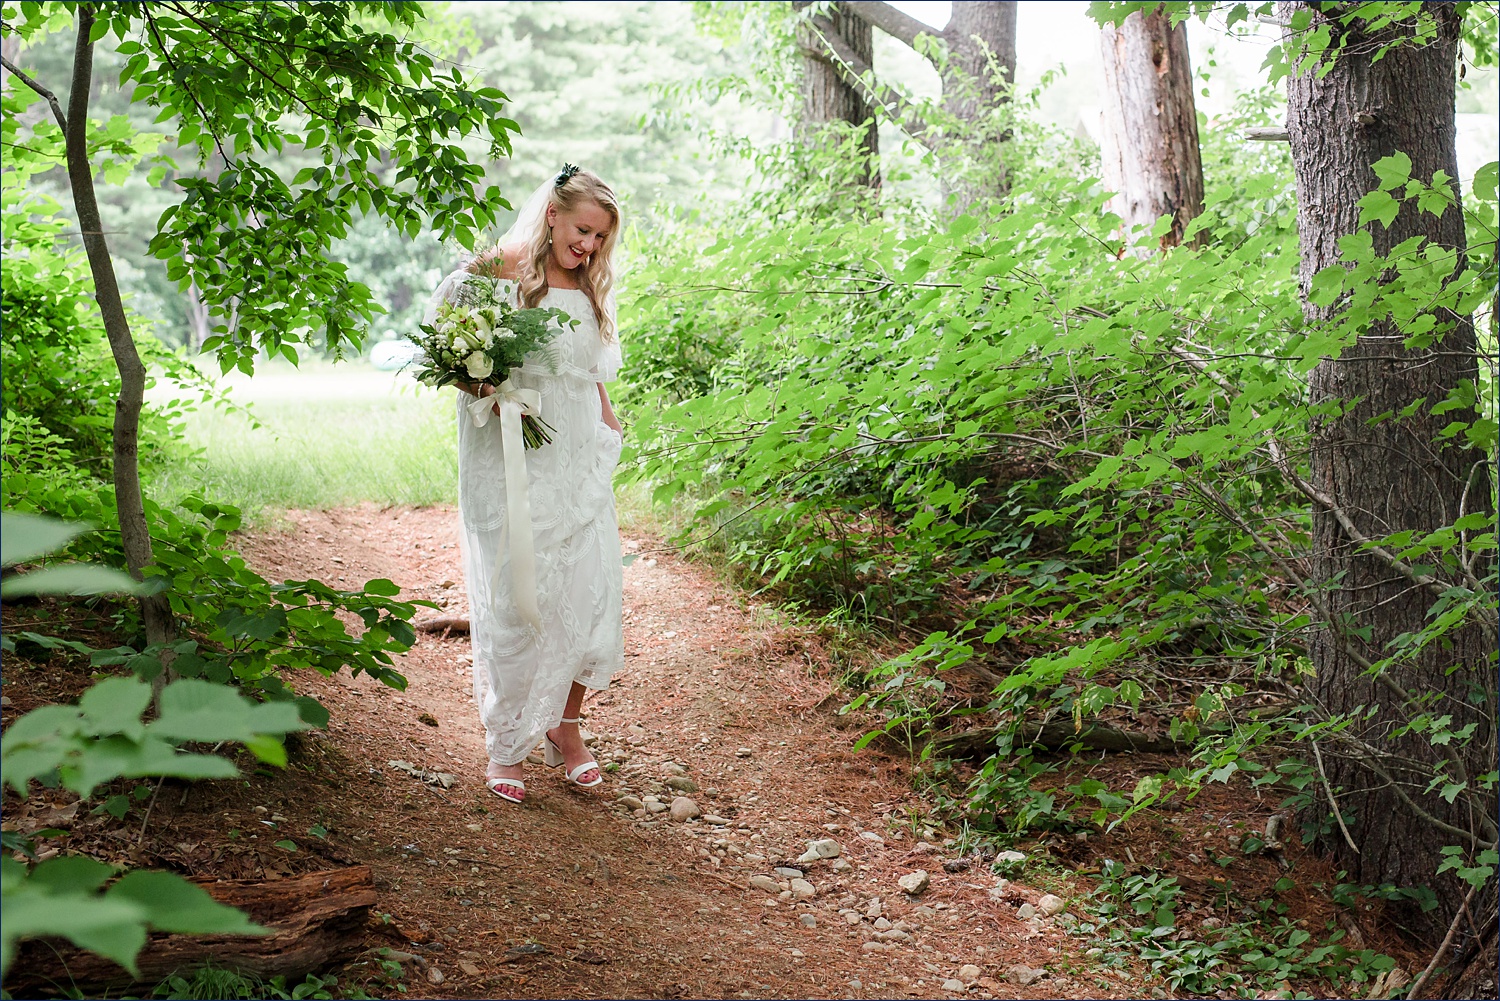 The bride walks through the woods to meet the groom for the first look